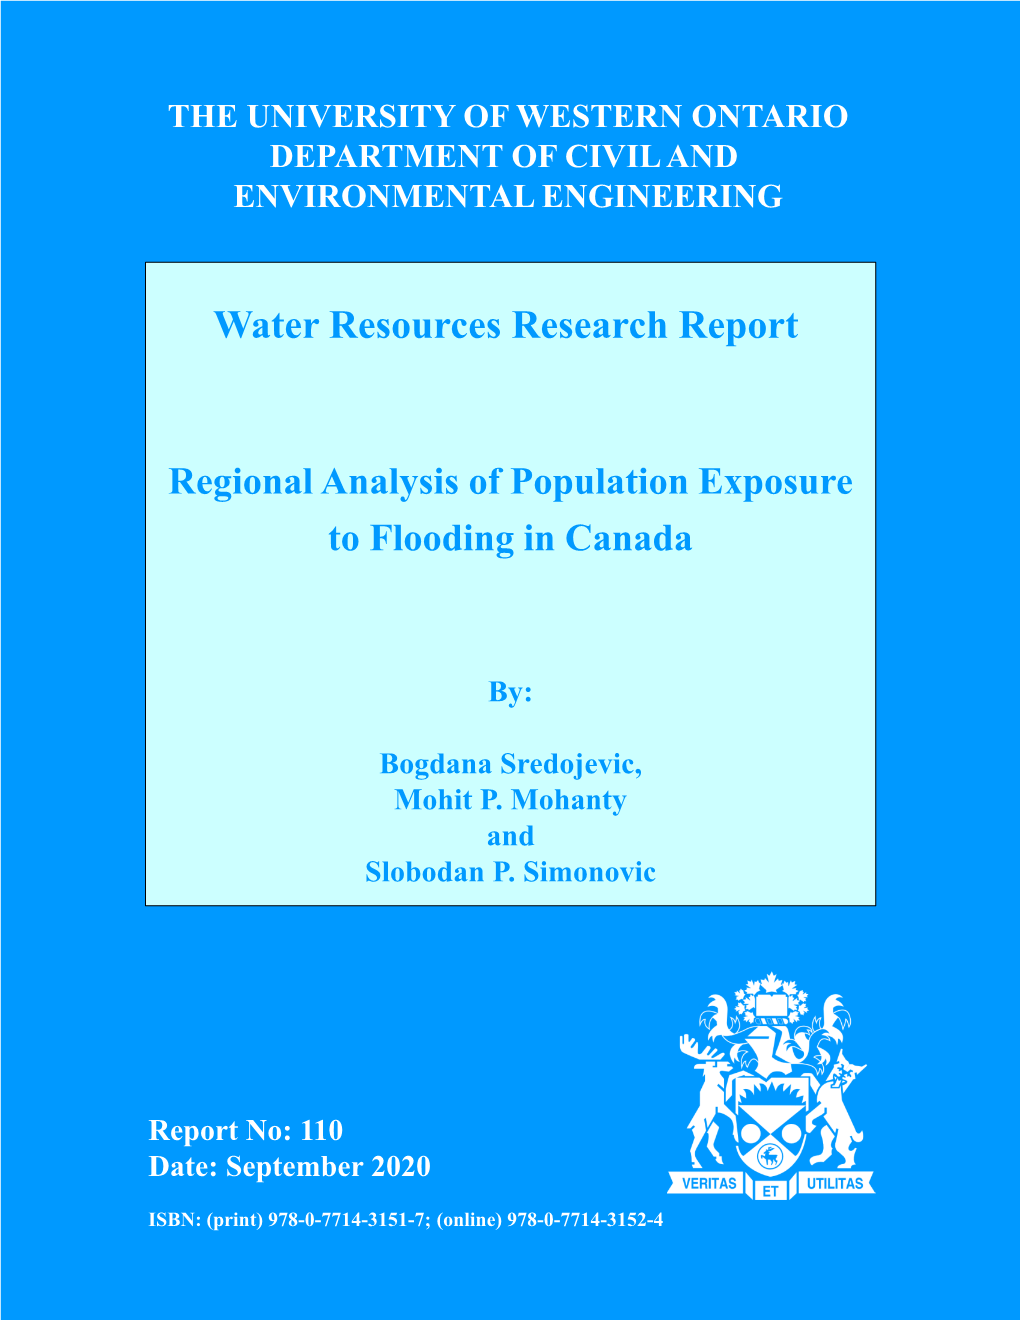 Regional Analysis of Population Exposure to Flooding in Canada